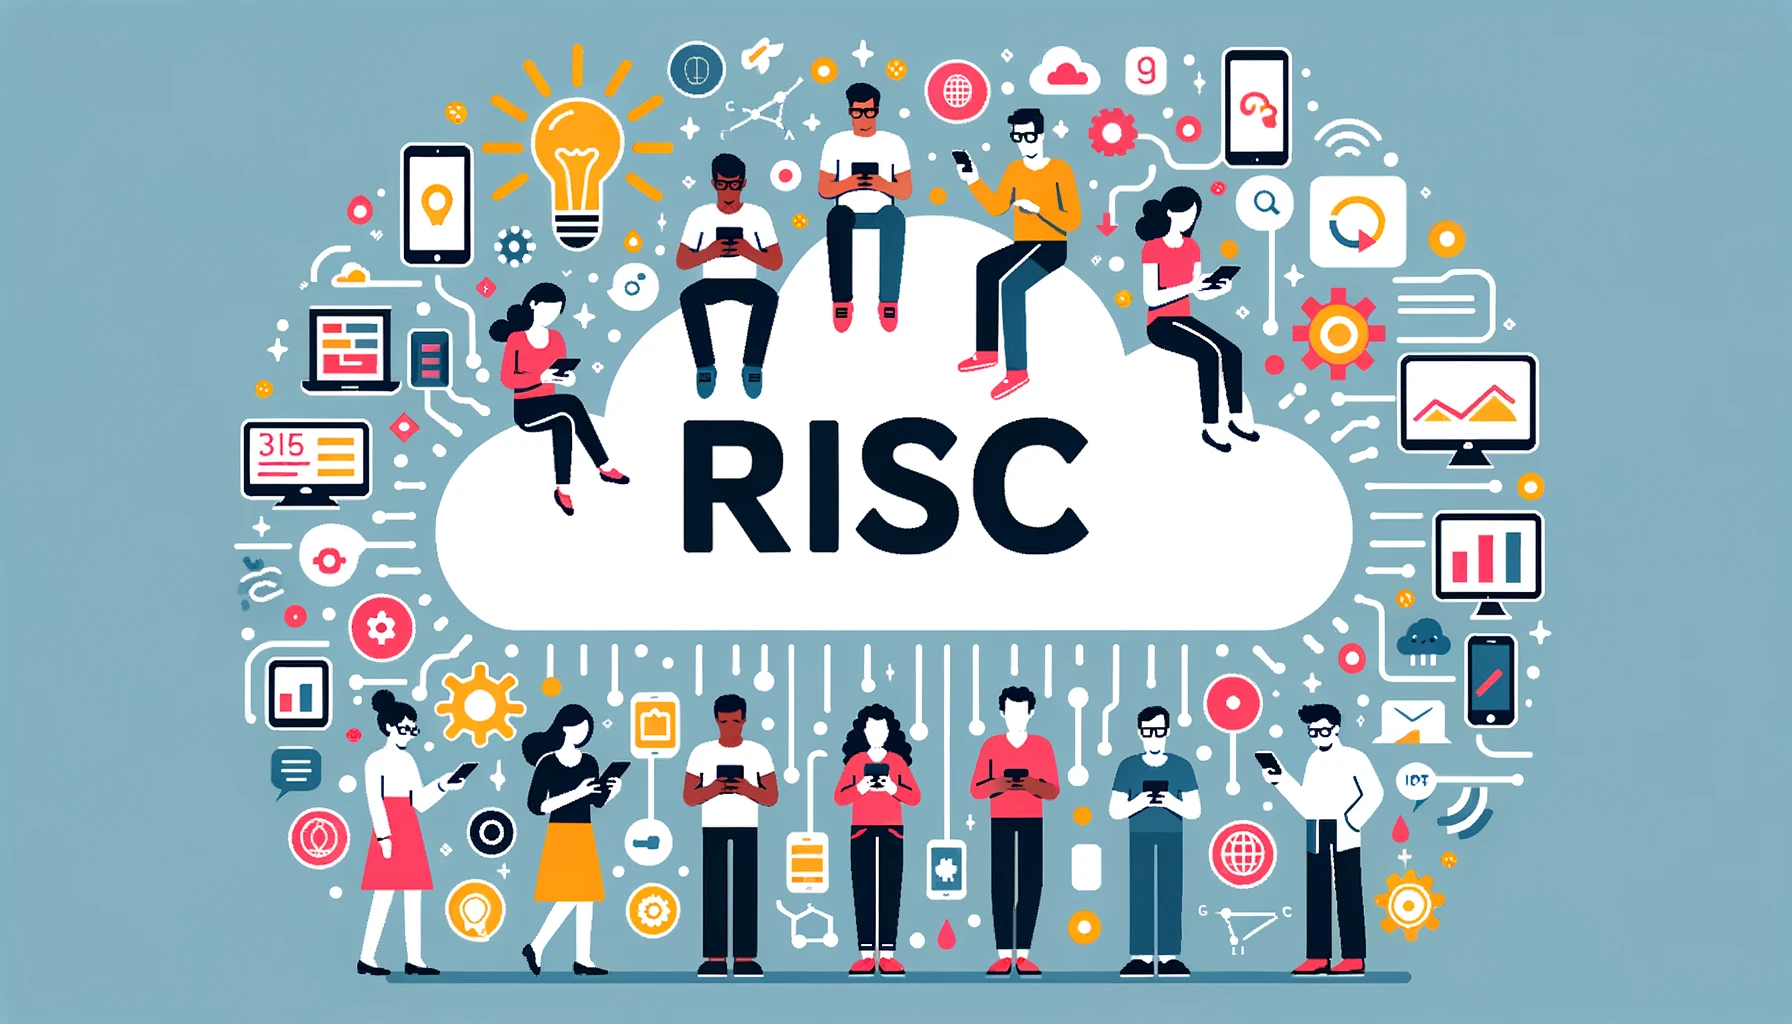 Illustration of RISC computers